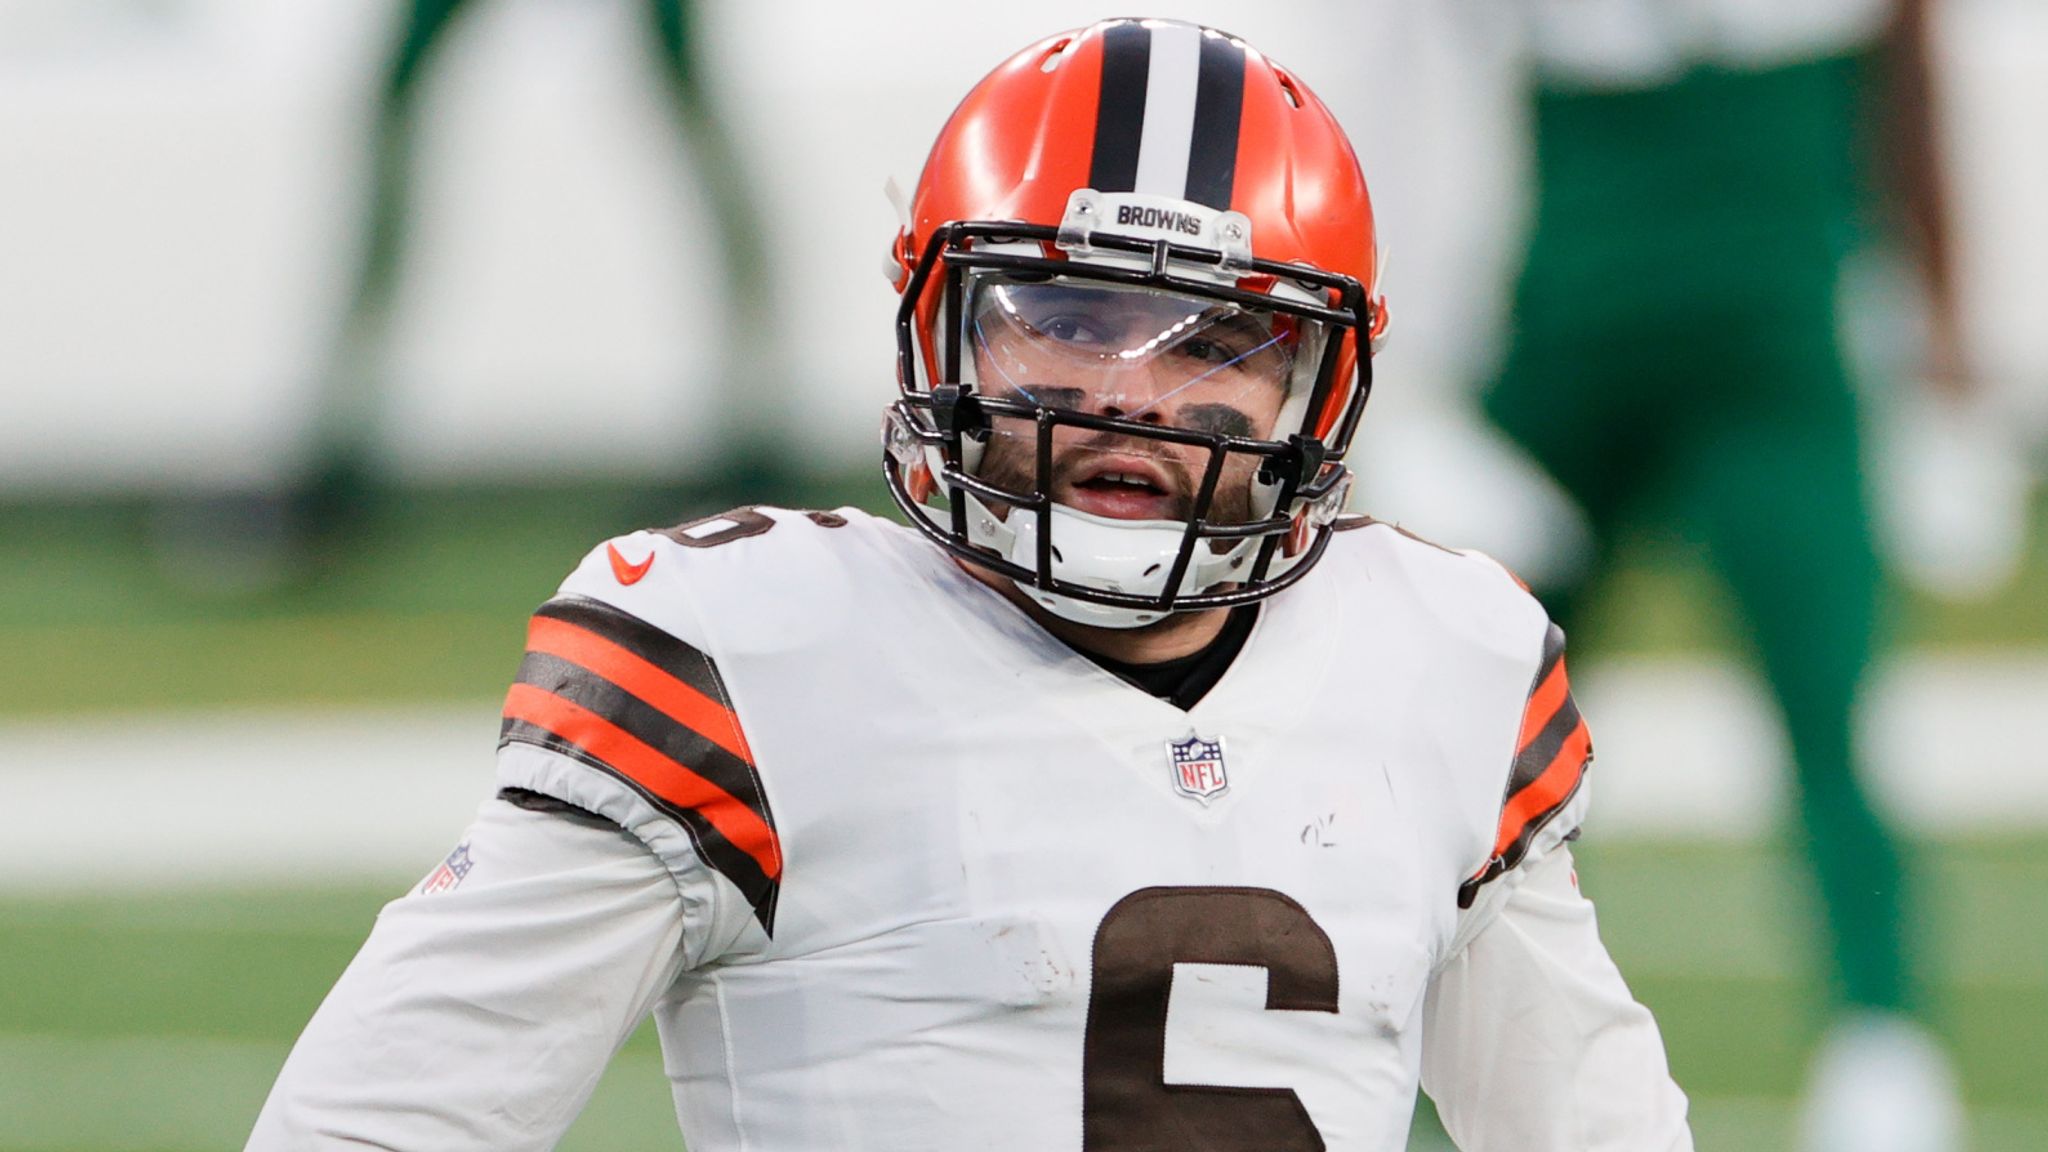 Browns will have Baker Mayfield back at quarterback Sunday vs. Steelers